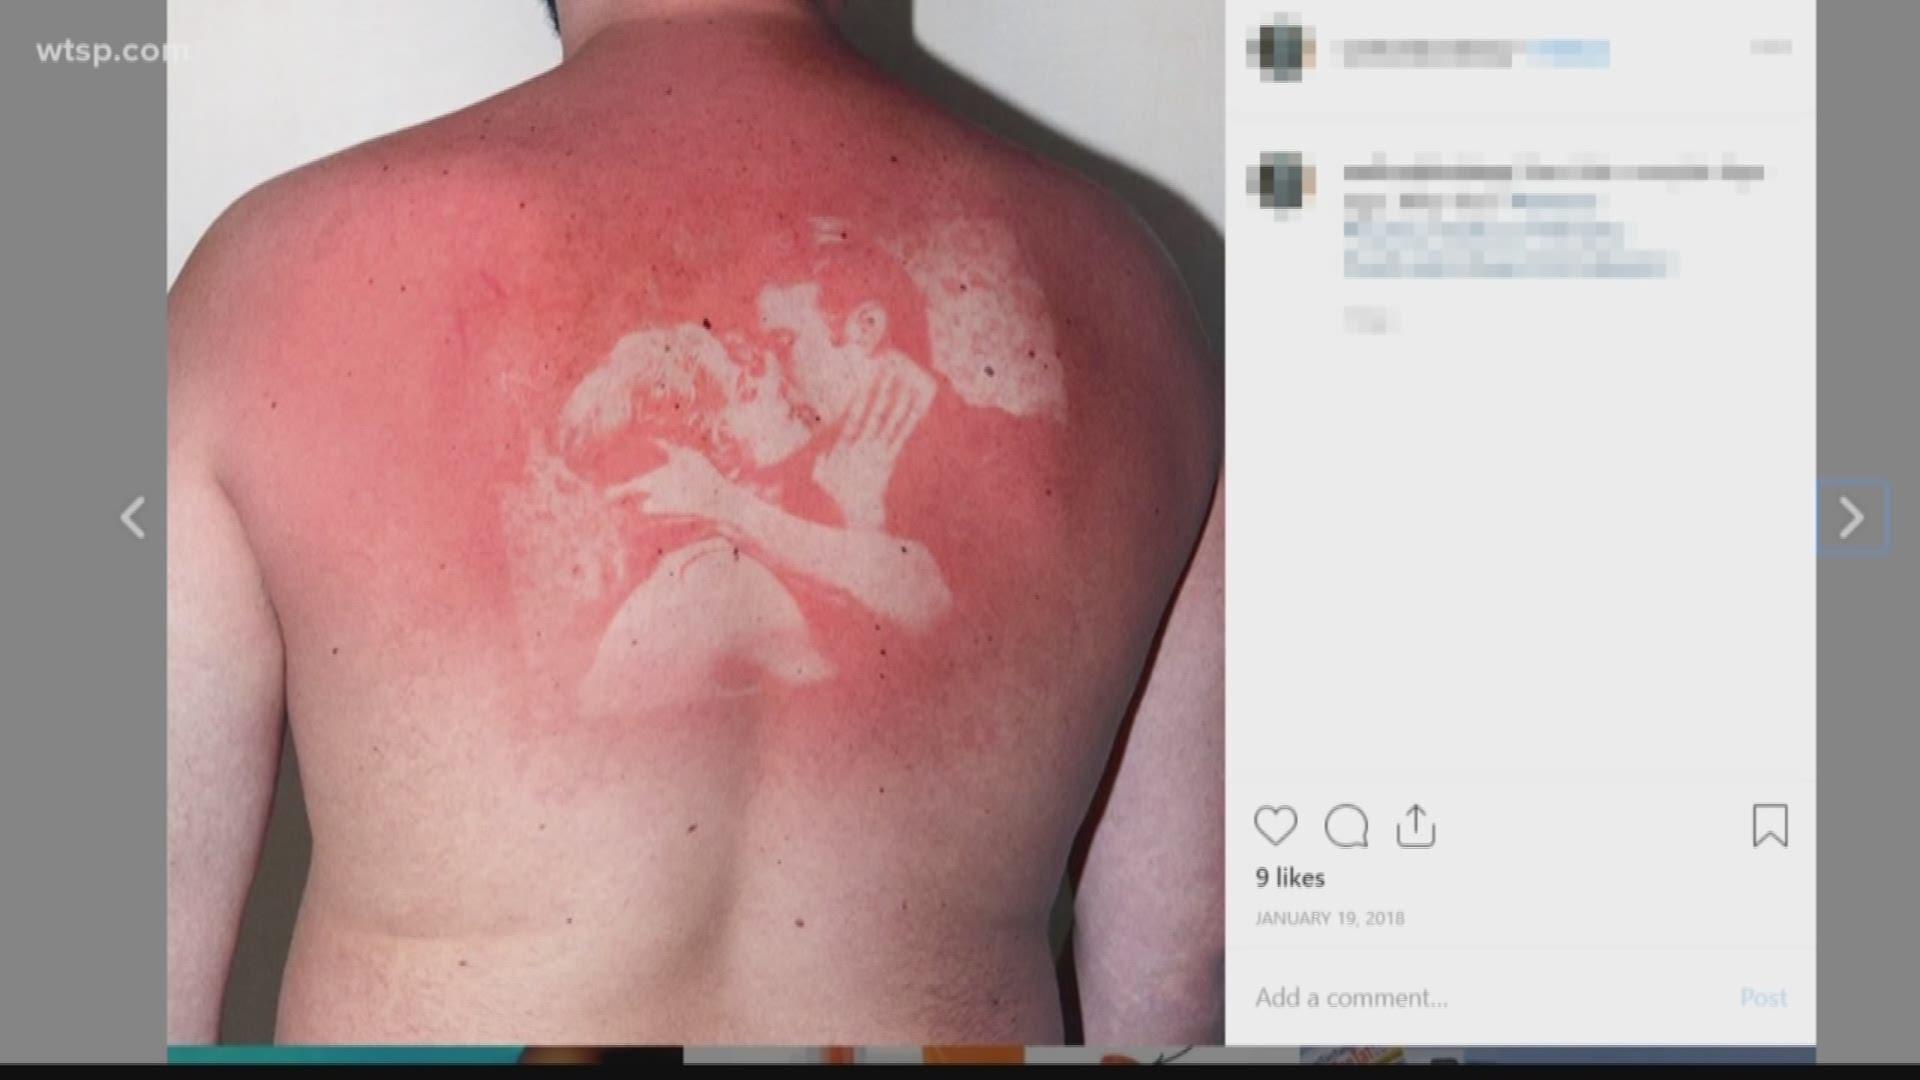 Burn on a Tattoo What It Could Look Like and What to Do